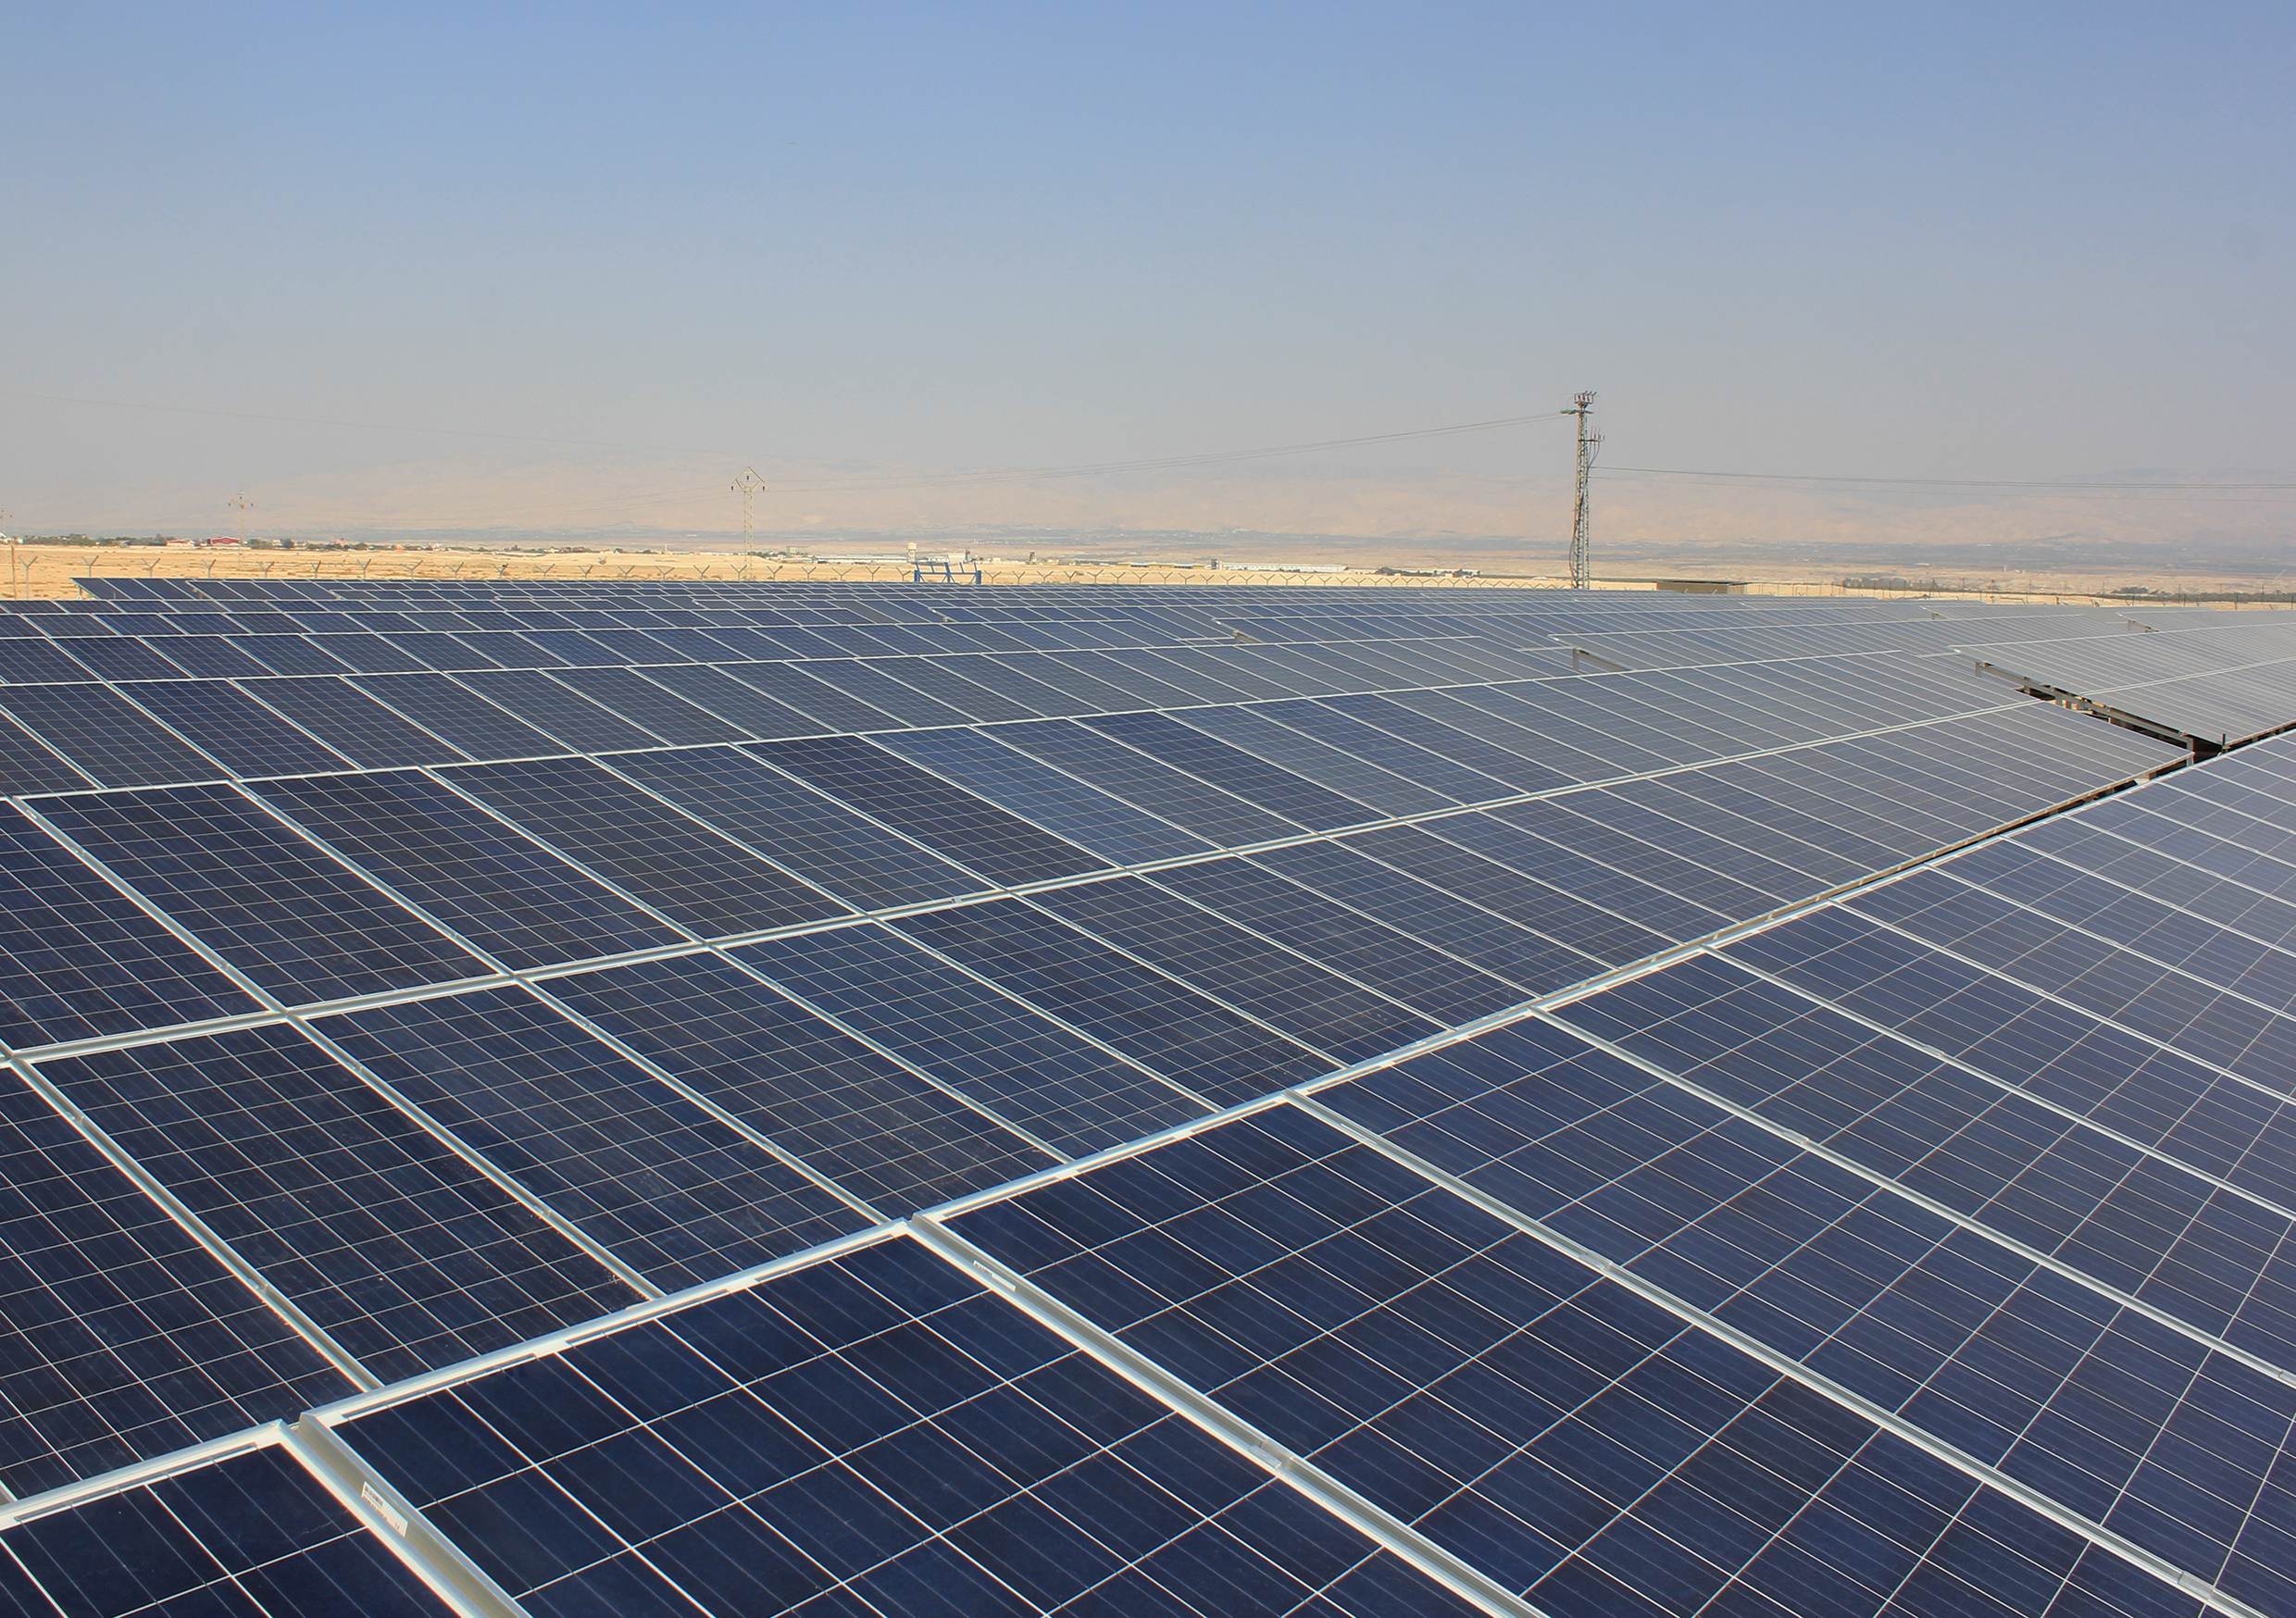 Construction of Ngonye solar Pv plant in Zambia commences